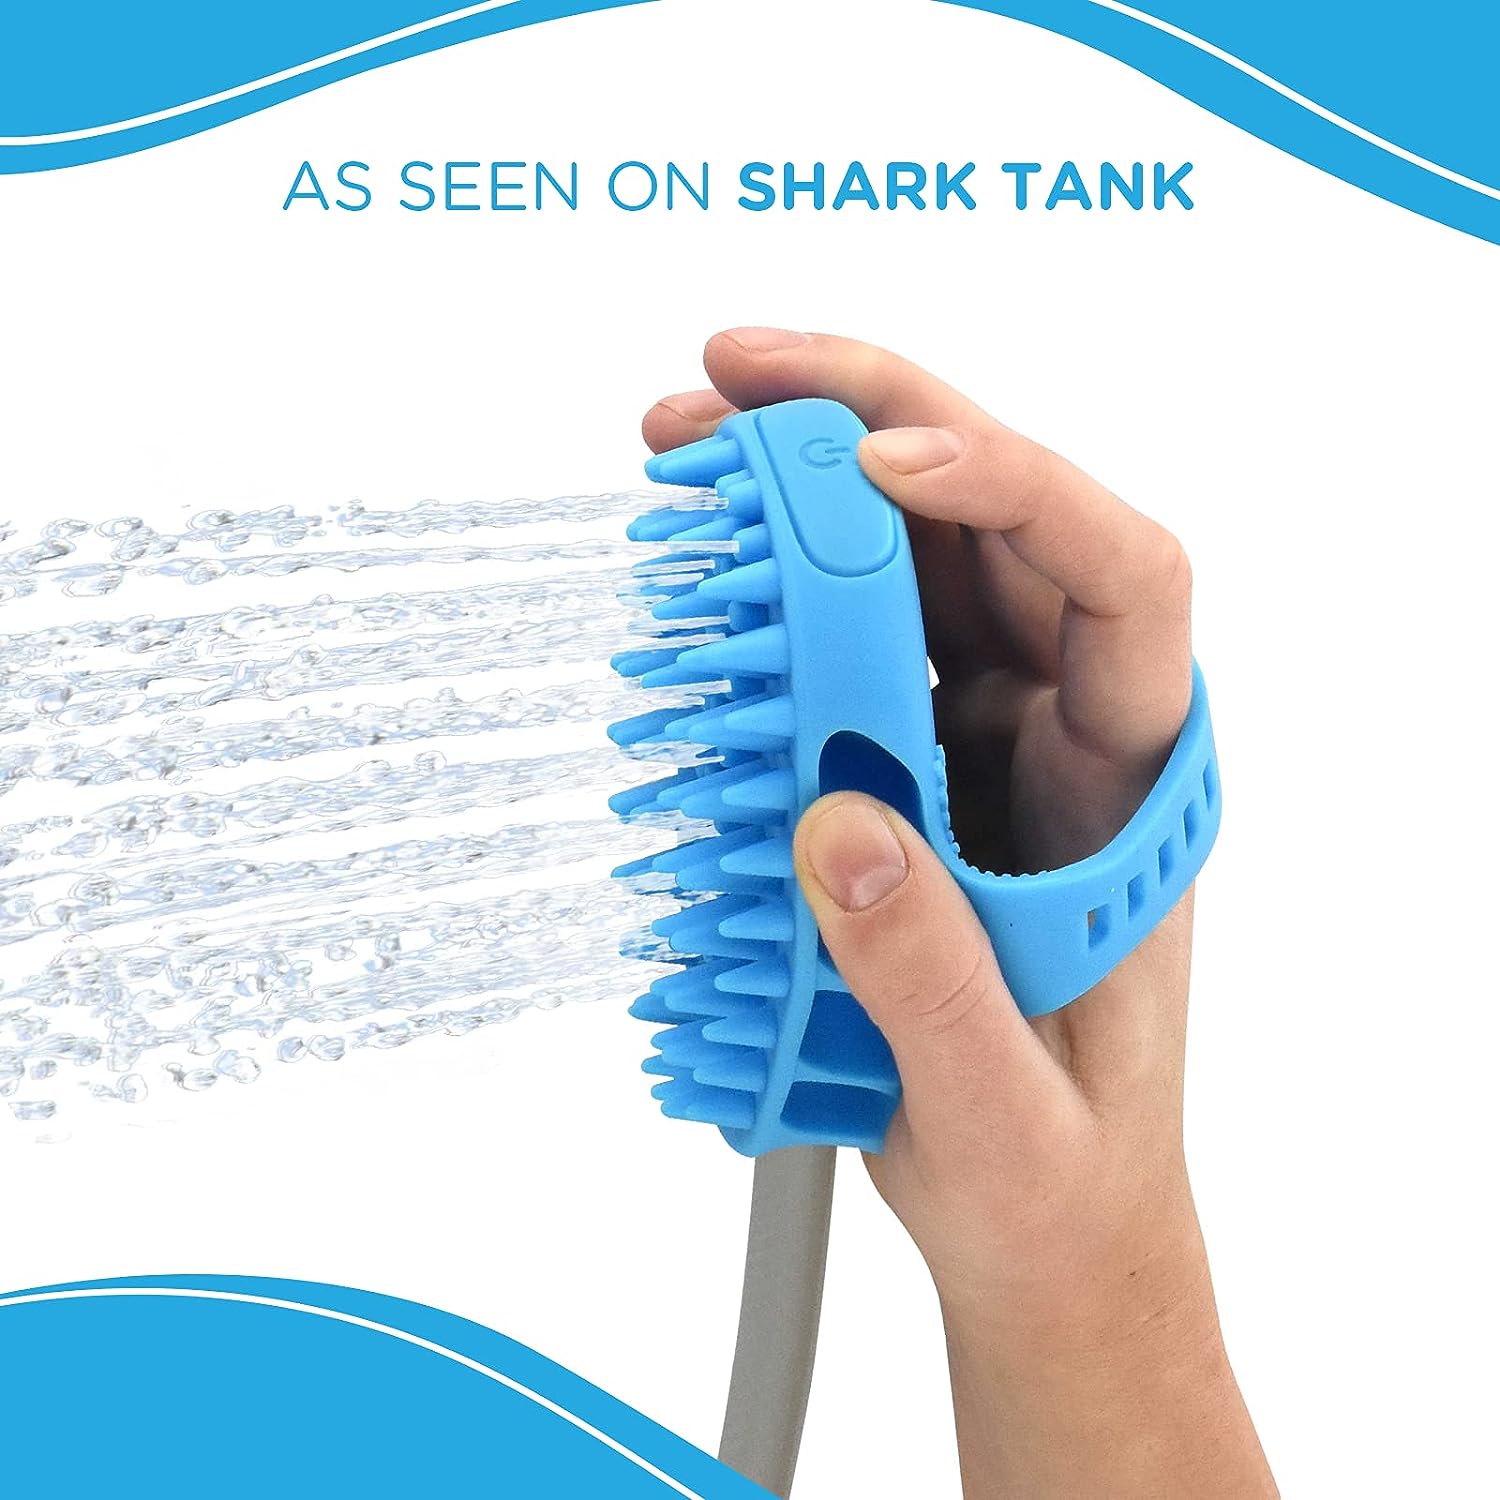 Aquapaw 4 in 1 Dog Bath Brush Pro for Dog Washing, Scrubbing, Massaging  Grooming | As Seen on Shark Tank - Fast  Easy Indoor  Outdoor Pet Shower  Sprayer Attachment | Includes 8-Foot Hose | Blue